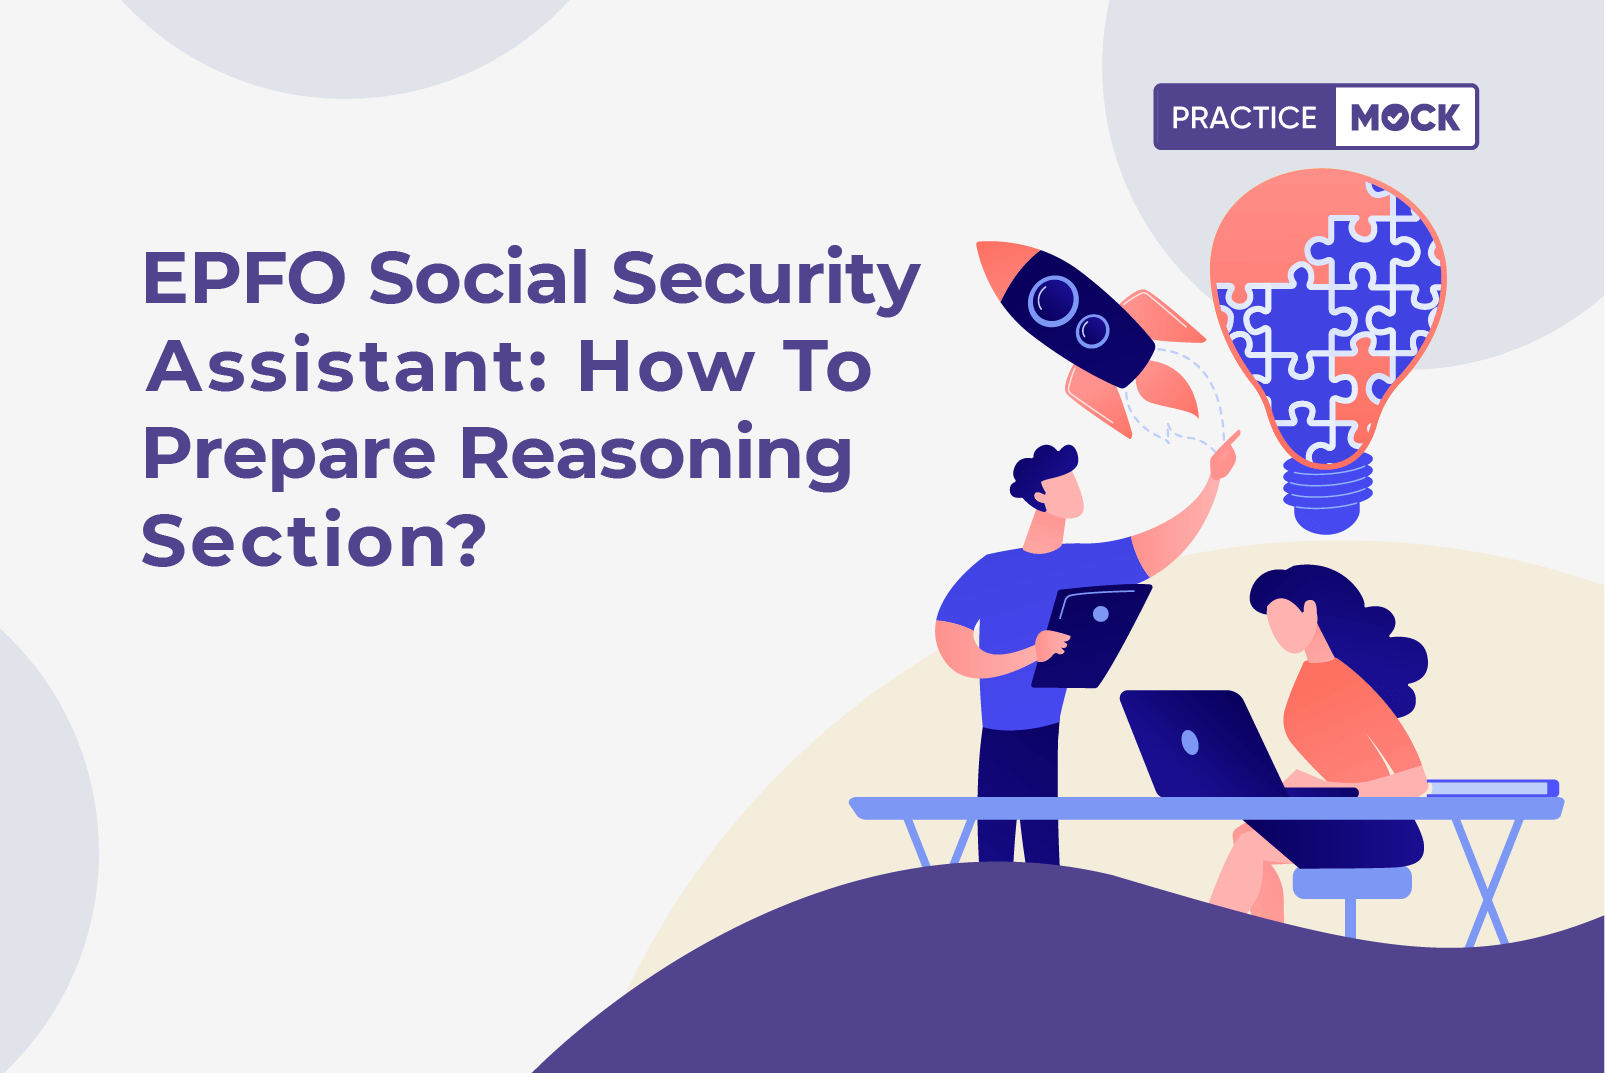 EPFO Social Security Assistant- How to Prepare Reasoning section